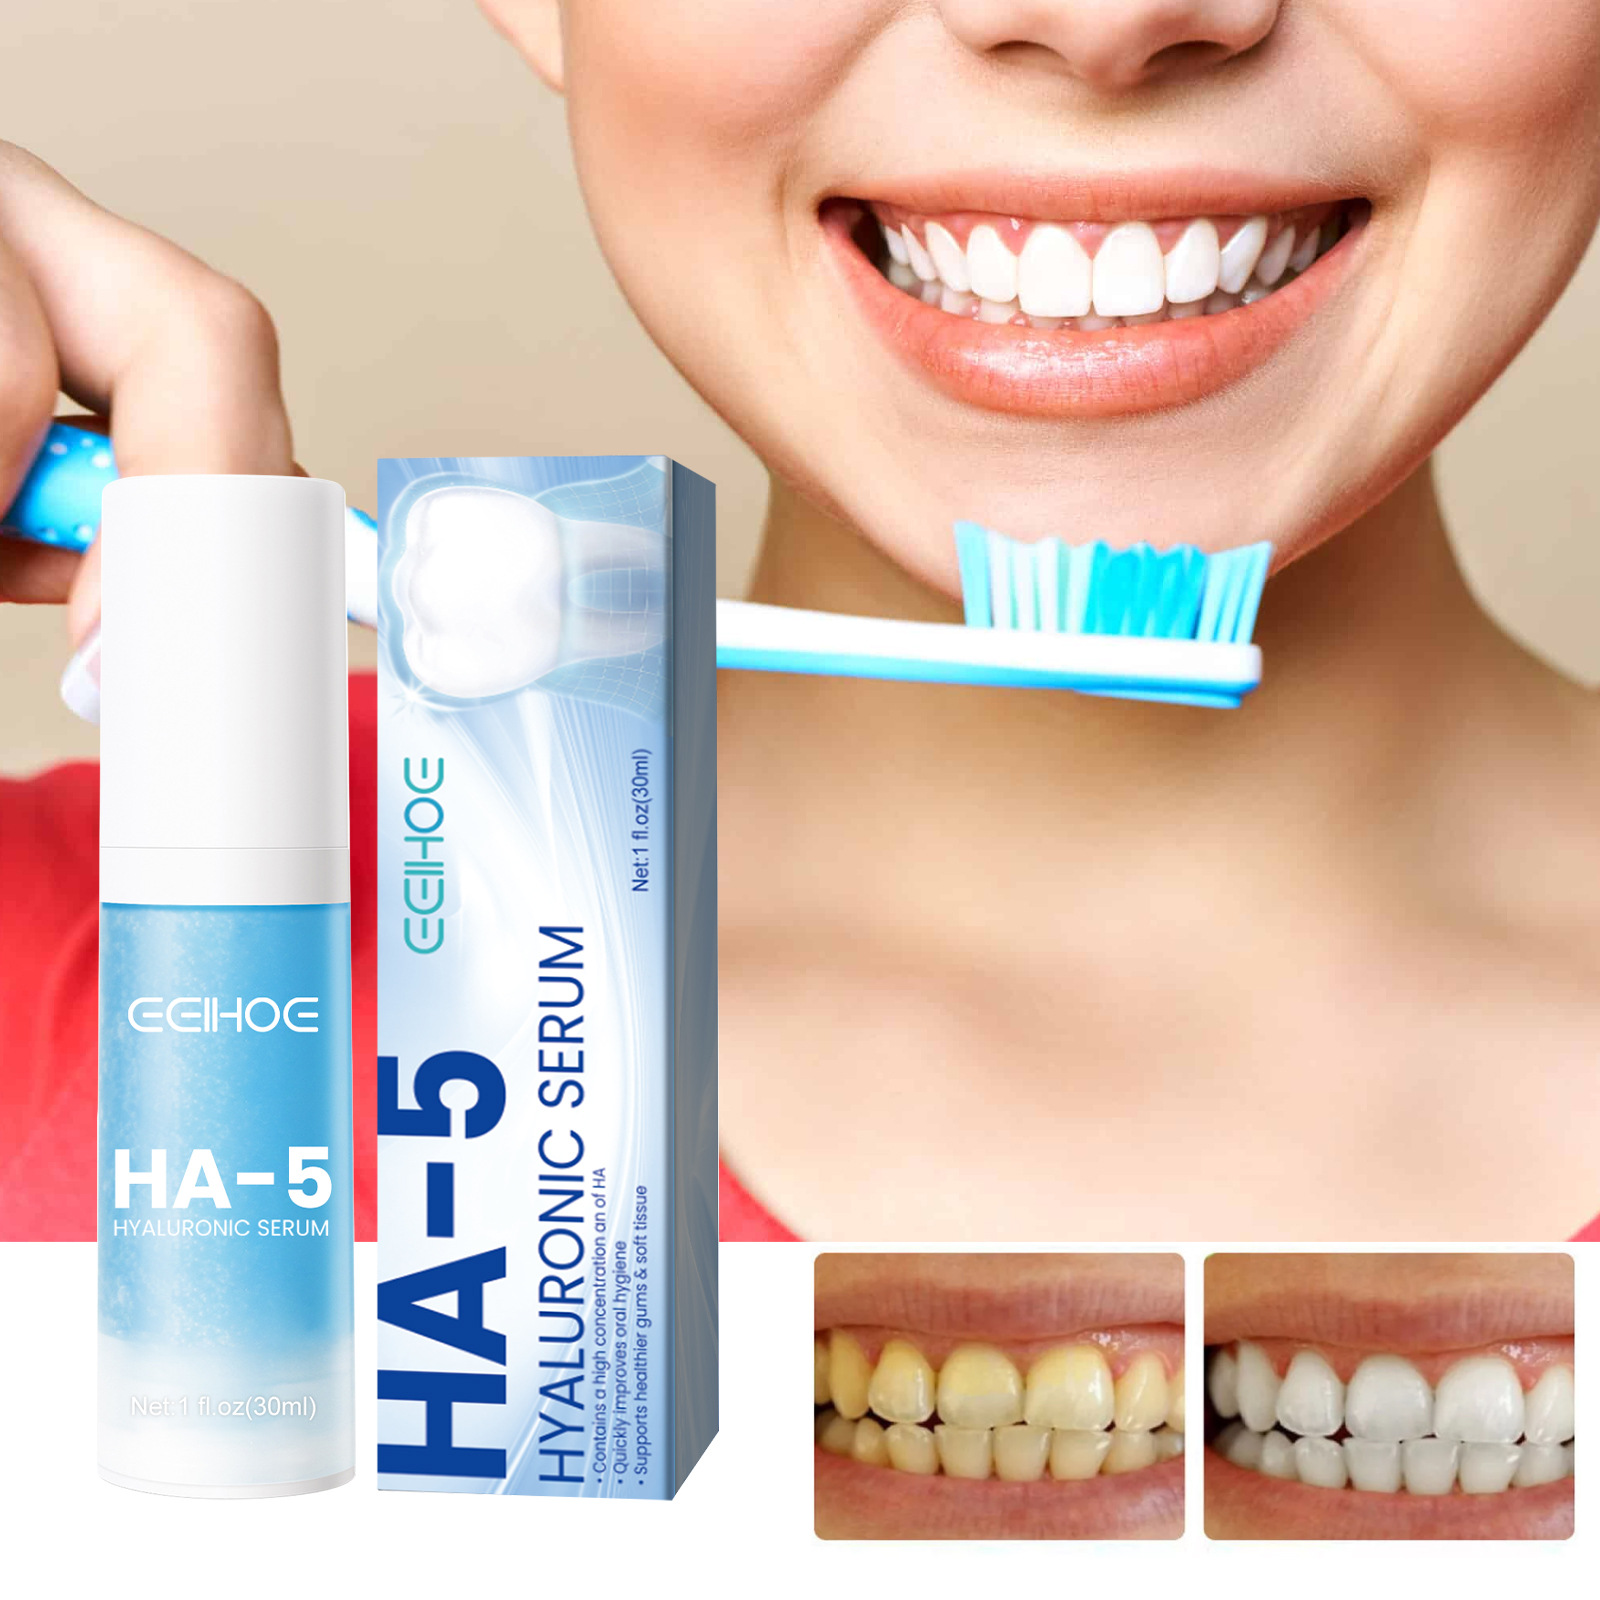 Eelhoe Whitening Toothpaste Cleaning Teeth Dirt Smoke Stains Plaque White Tooth Protection Breath Fresh Care Toothpaste